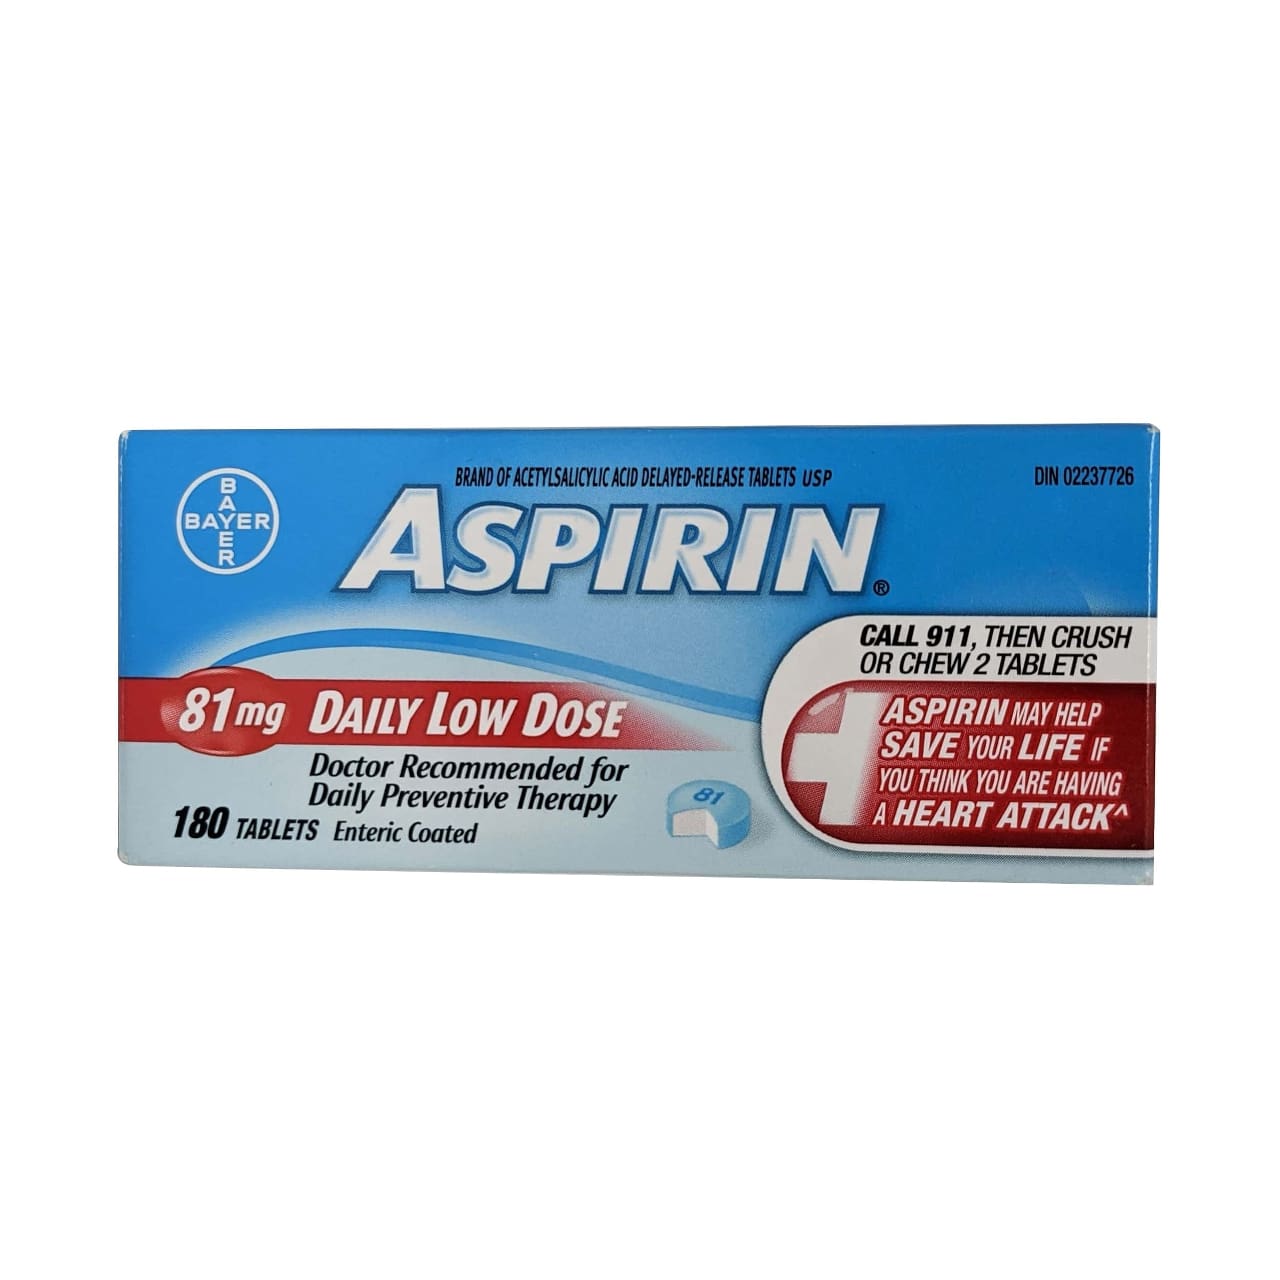 Product package for Aspirin Acetylsalicylic Acid 81mg Low Dose Delayed Release Tablets 180 pack in English